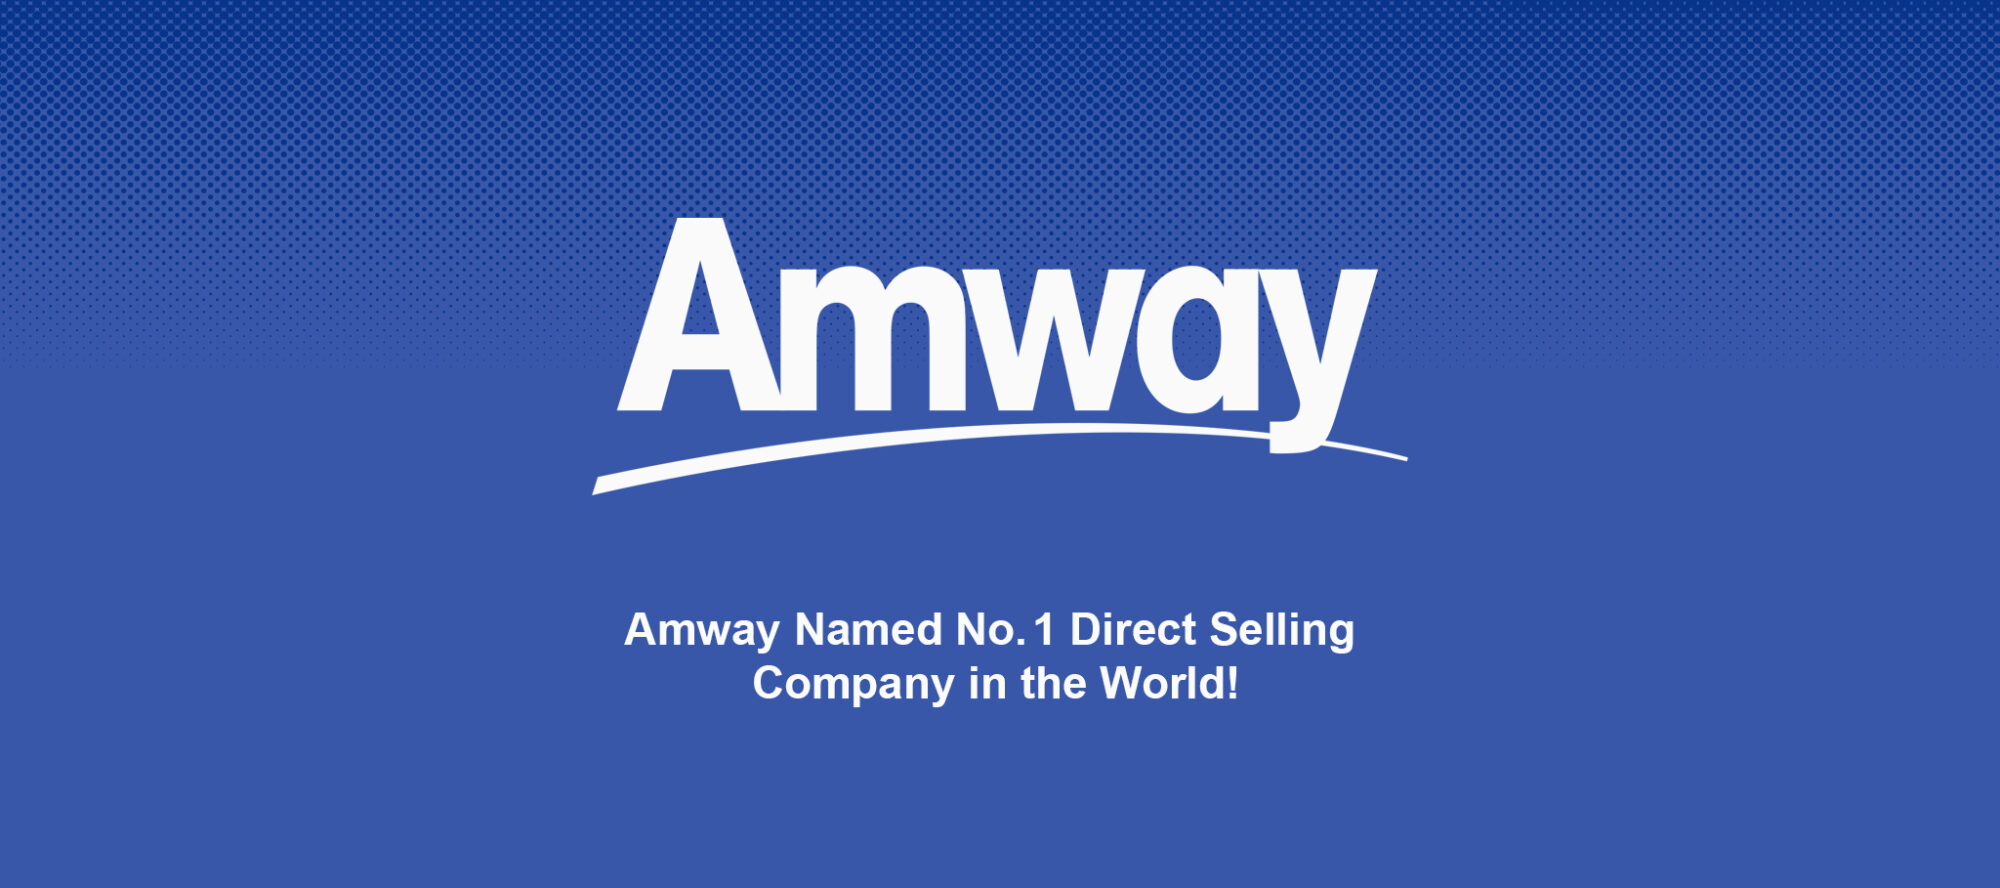 Amway Named No. 1 Direct Selling Company in the World